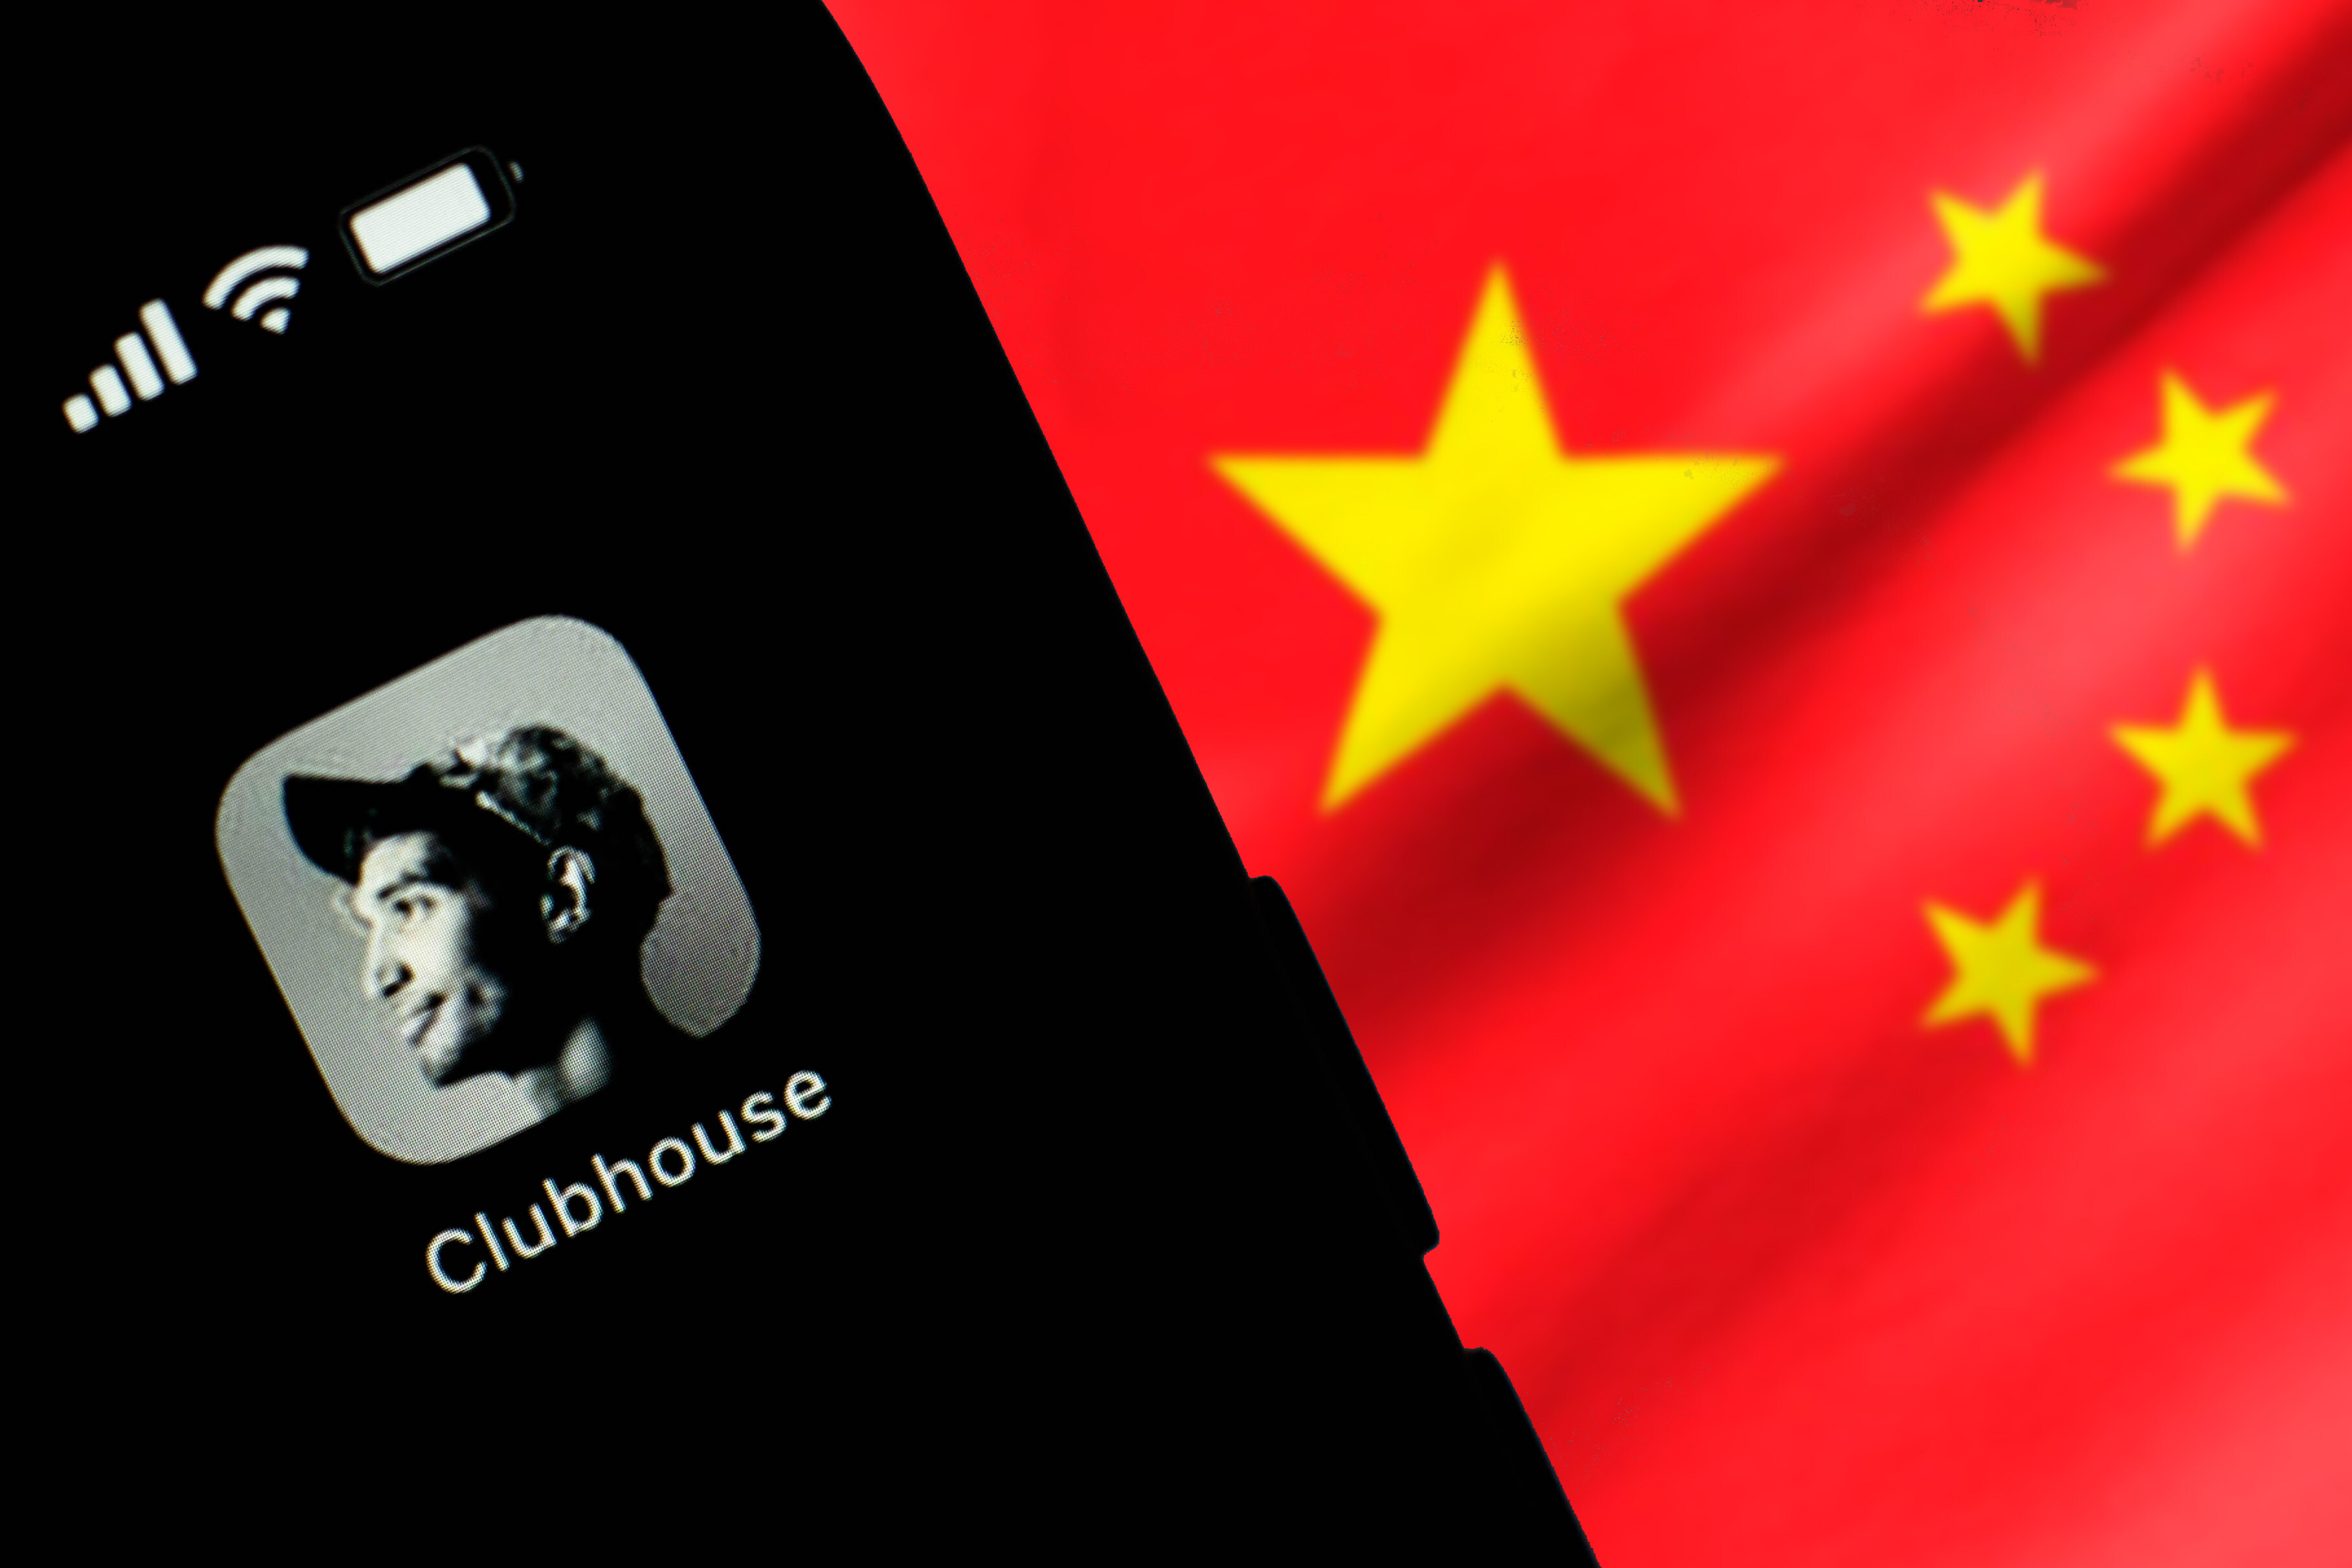 After the Clubhouse audio app was blocked in mainland China, reports of data security breaches emerged. Photo: Getty Images